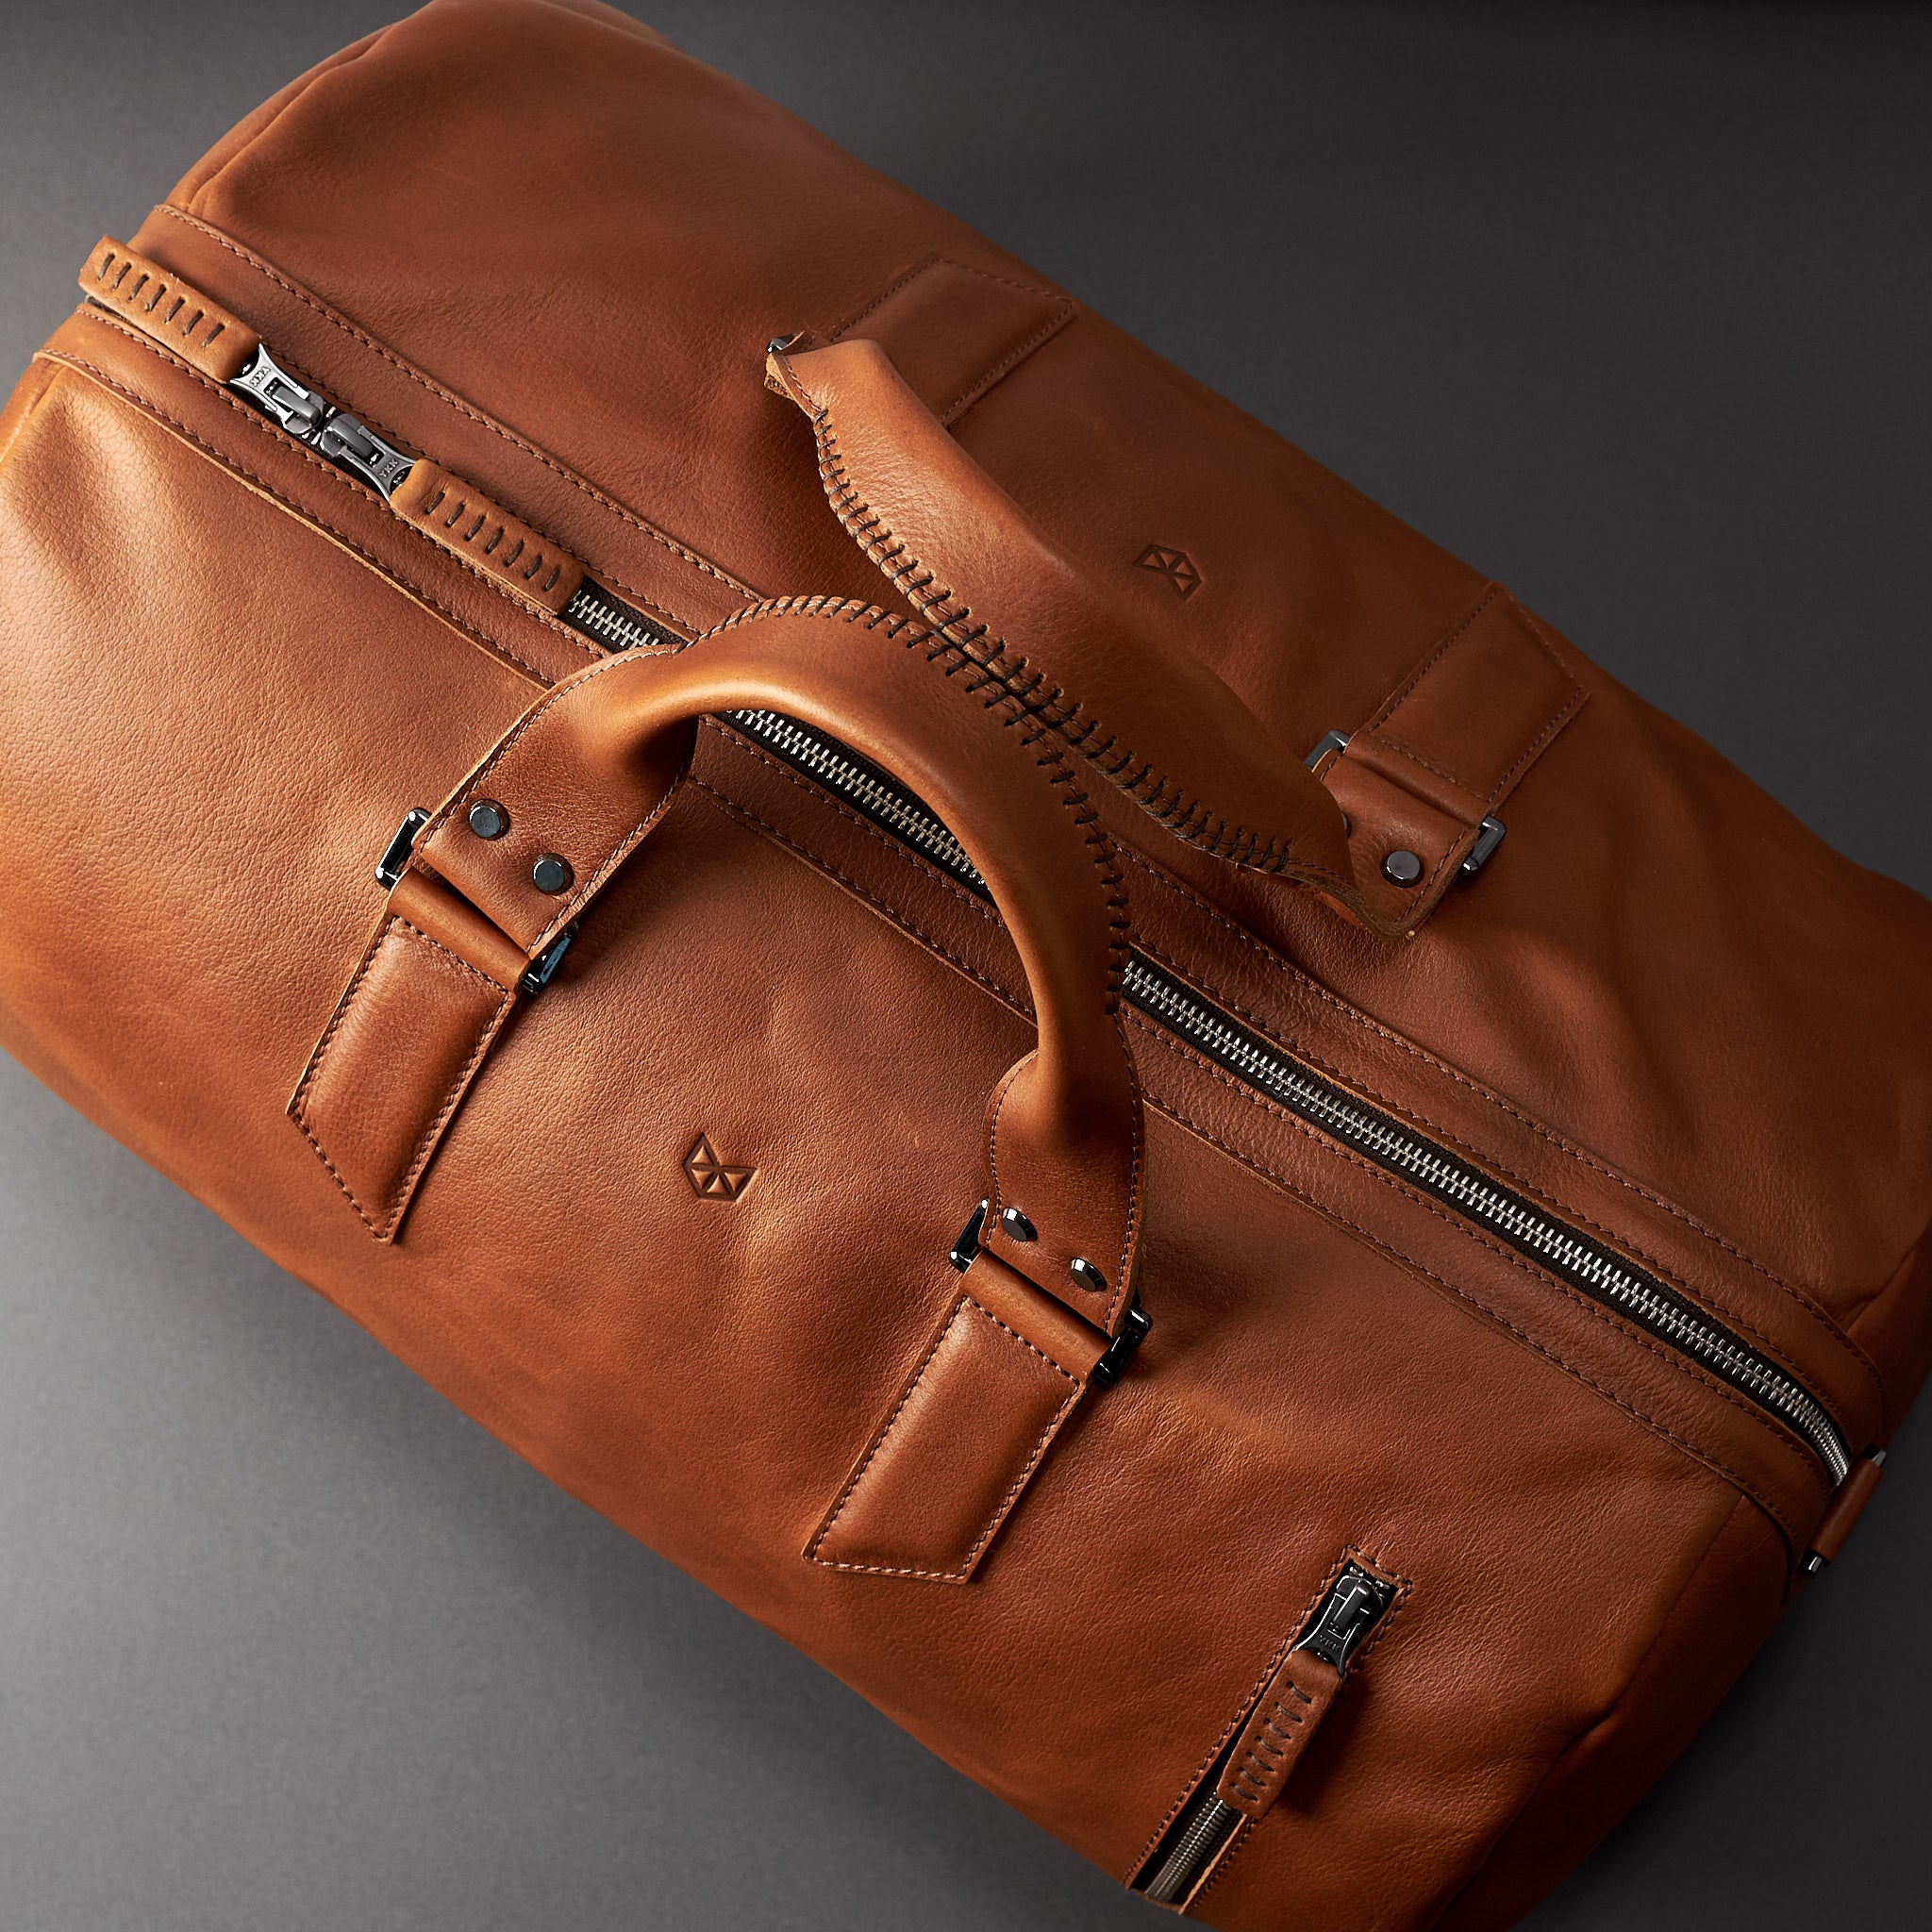 Substantial Duffle Bag Size Guide by Capra Leather